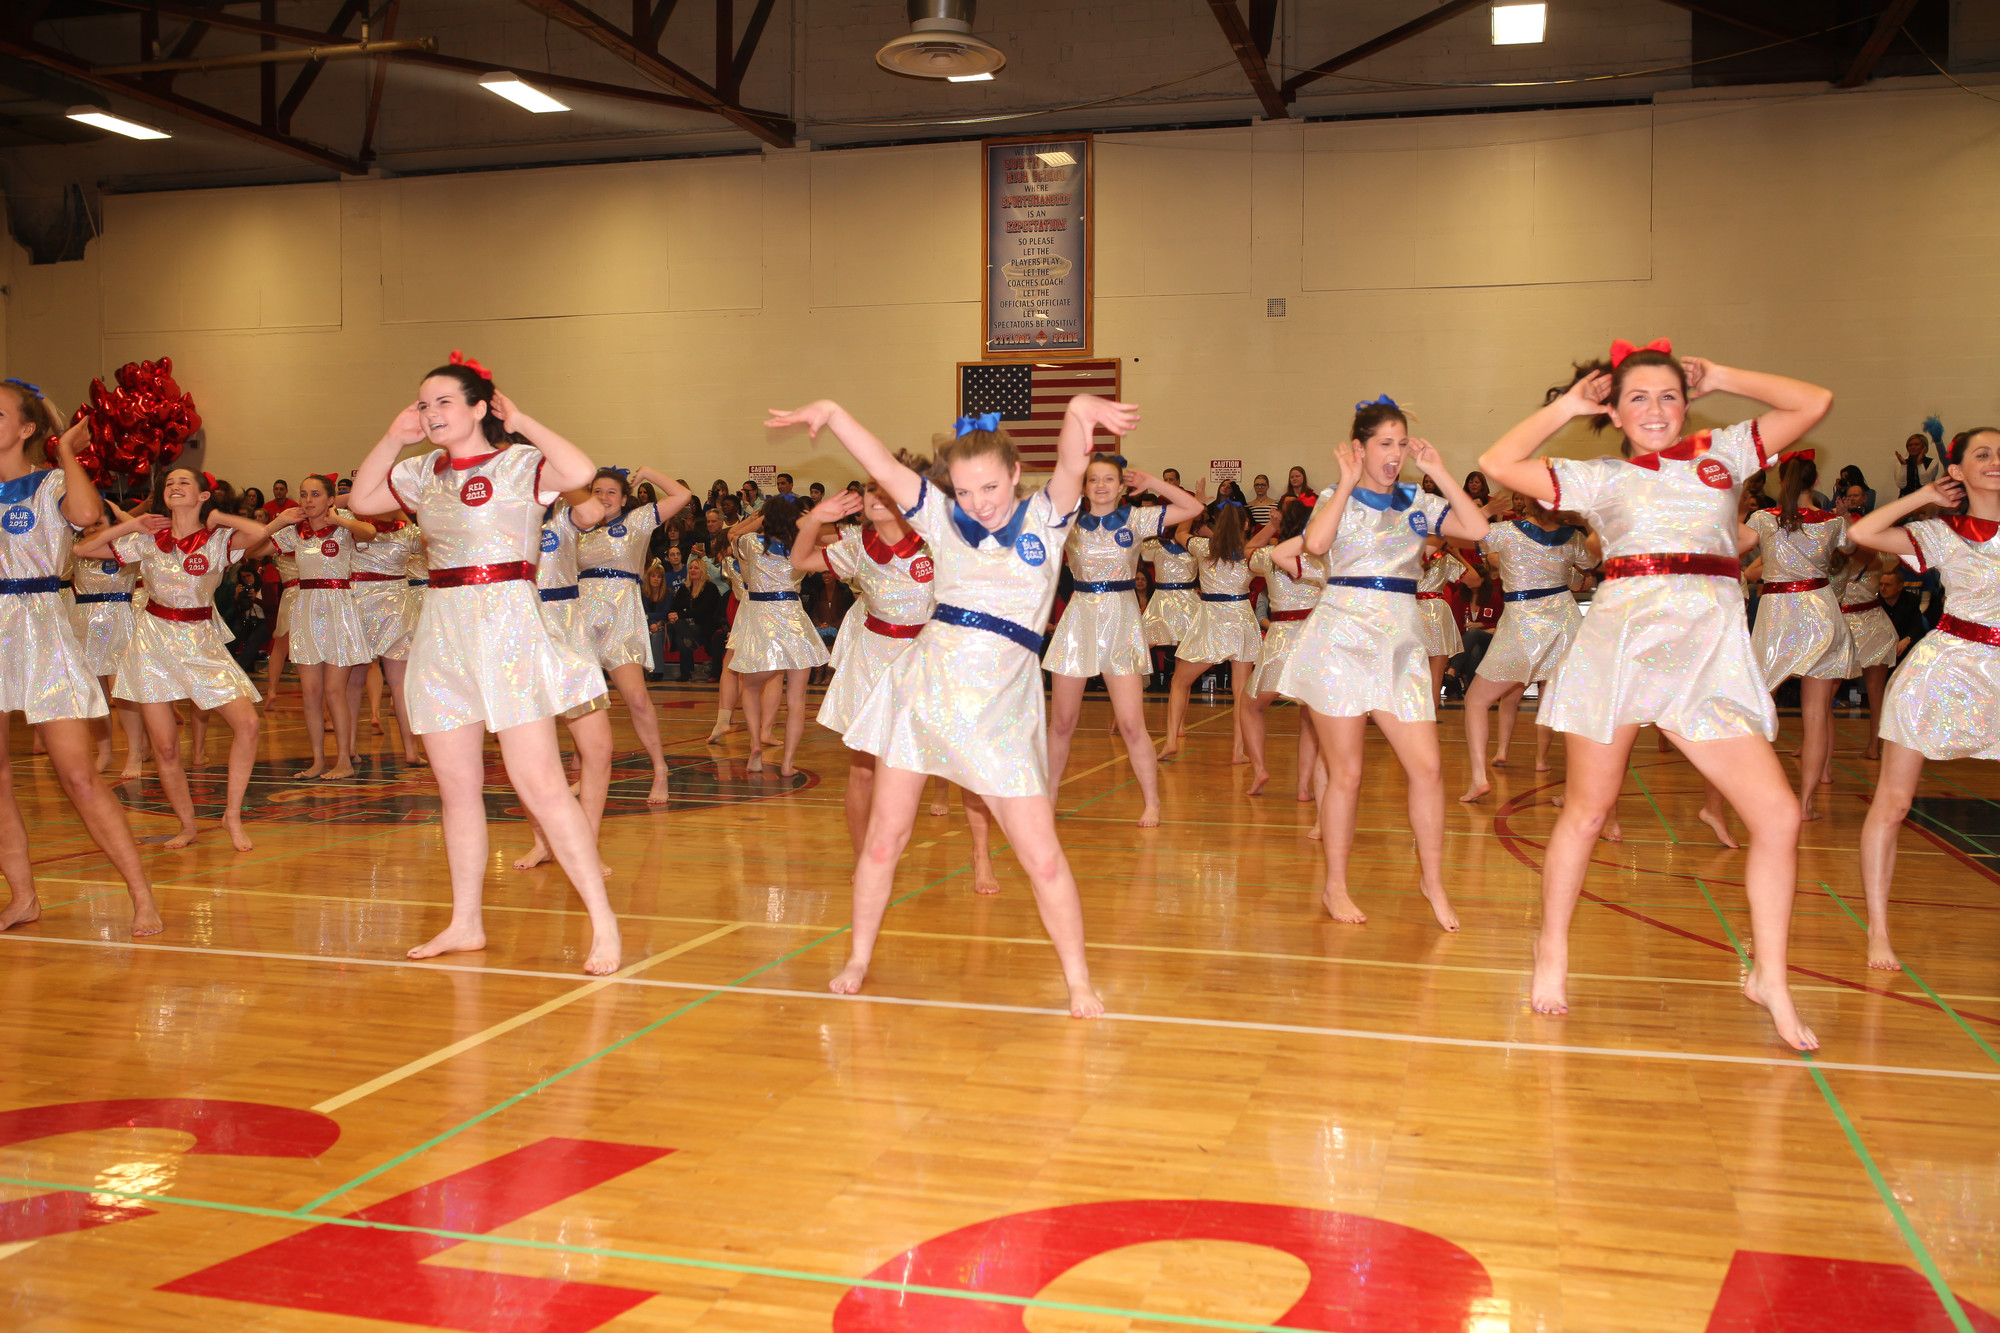 Blue Team Dancers captured the traditions of Red and Blue with their dance, where they dressed as participants on Song Night.